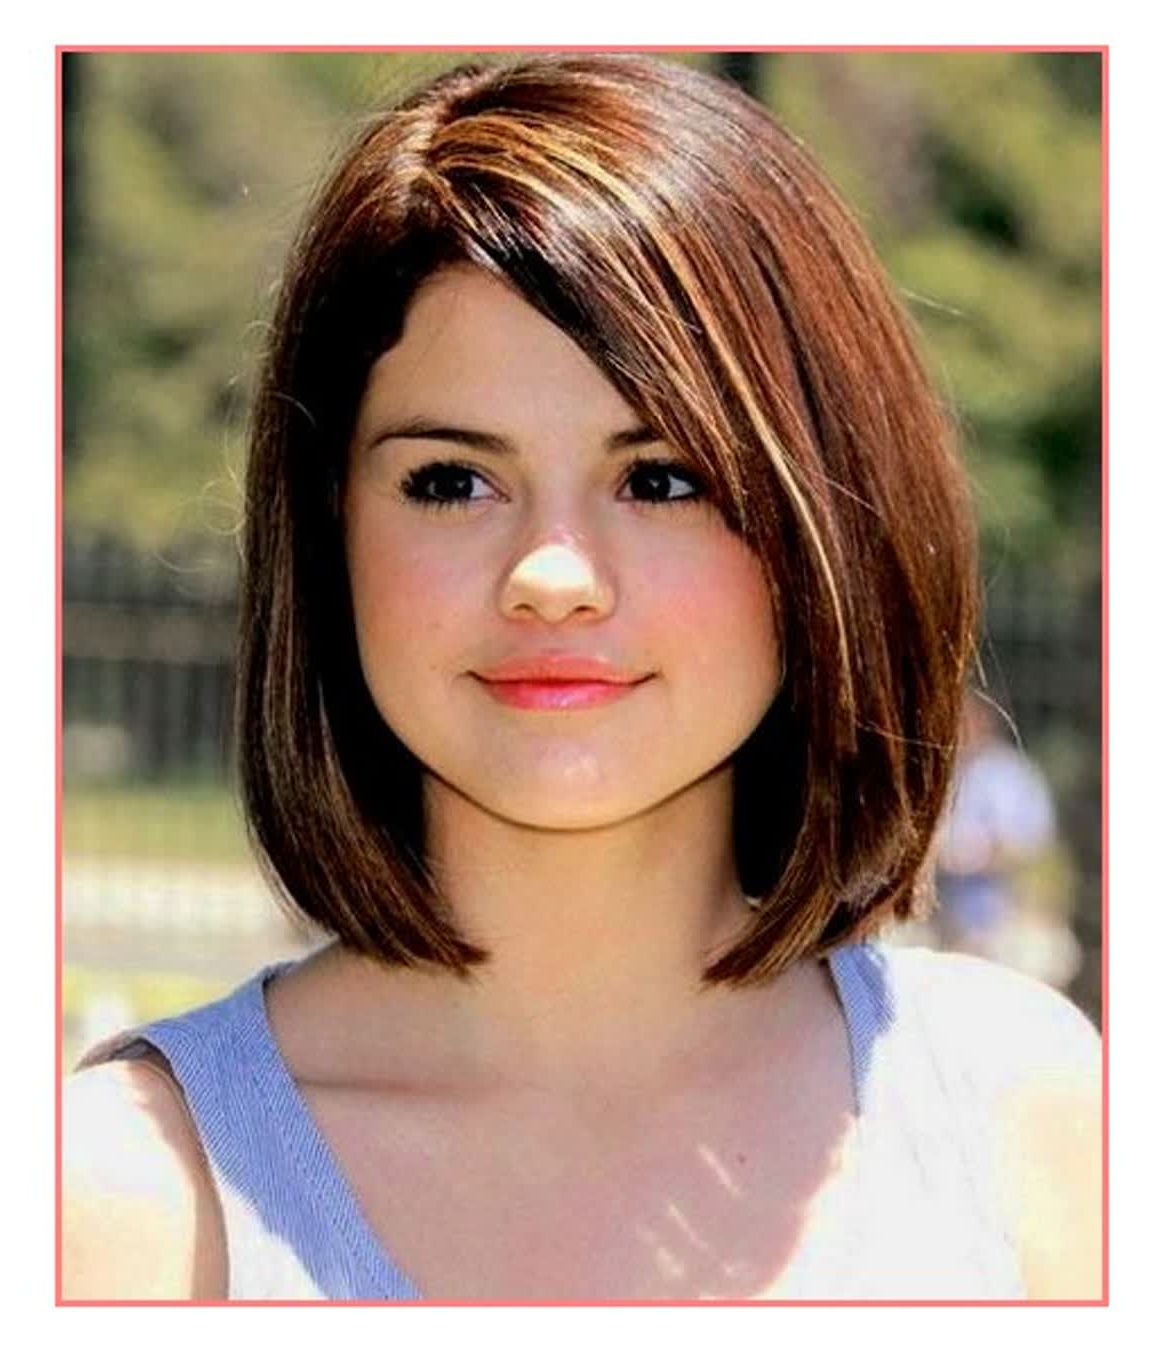 Hair Cuts : Short Haircuts For Ladies With Thick Hair Women Over For Short Medium Hairstyles For Round Faces (View 8 of 25)